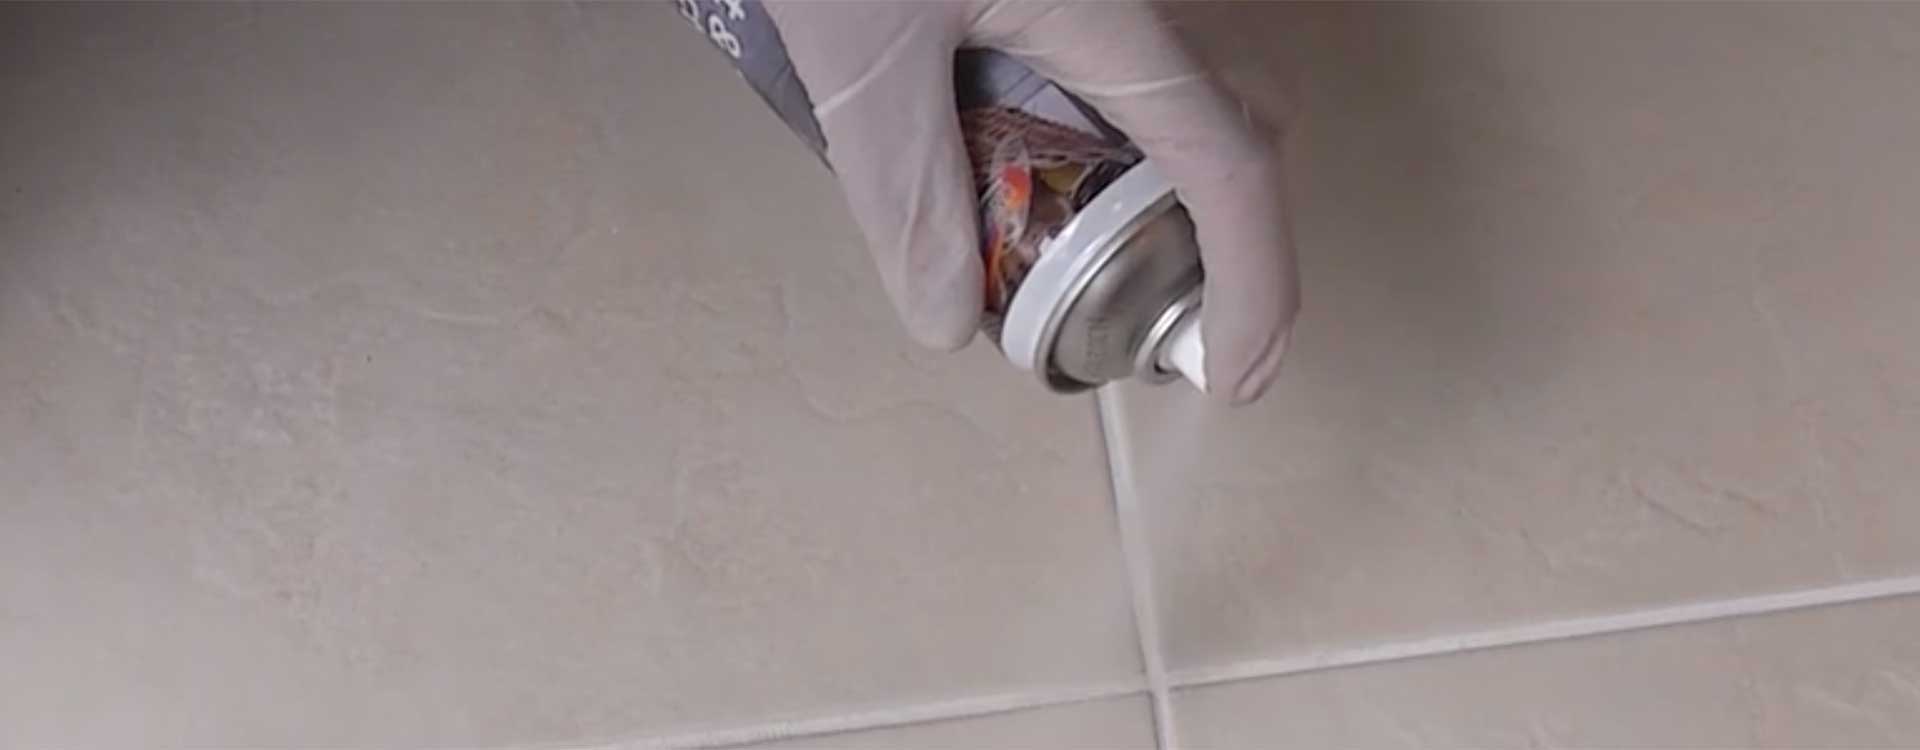 grout sealer dry